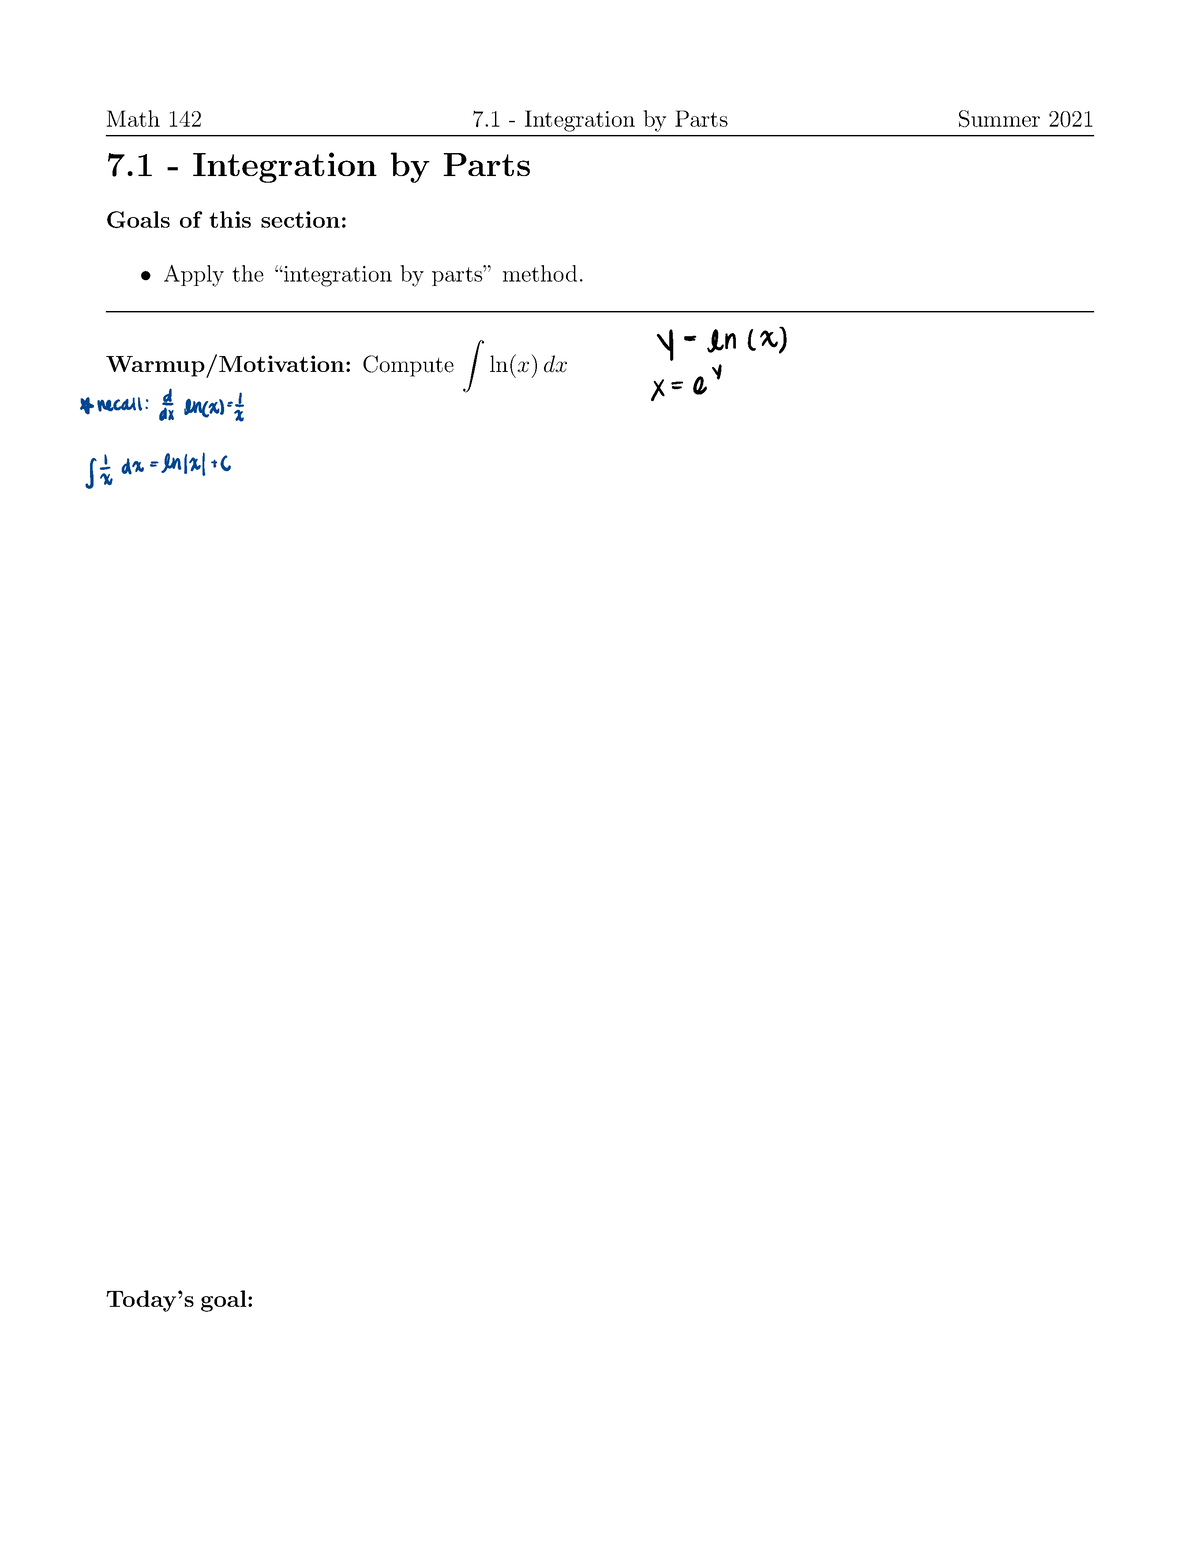 chapter-7-ch7-math-142-7-integration-by-parts-summer-2021-7